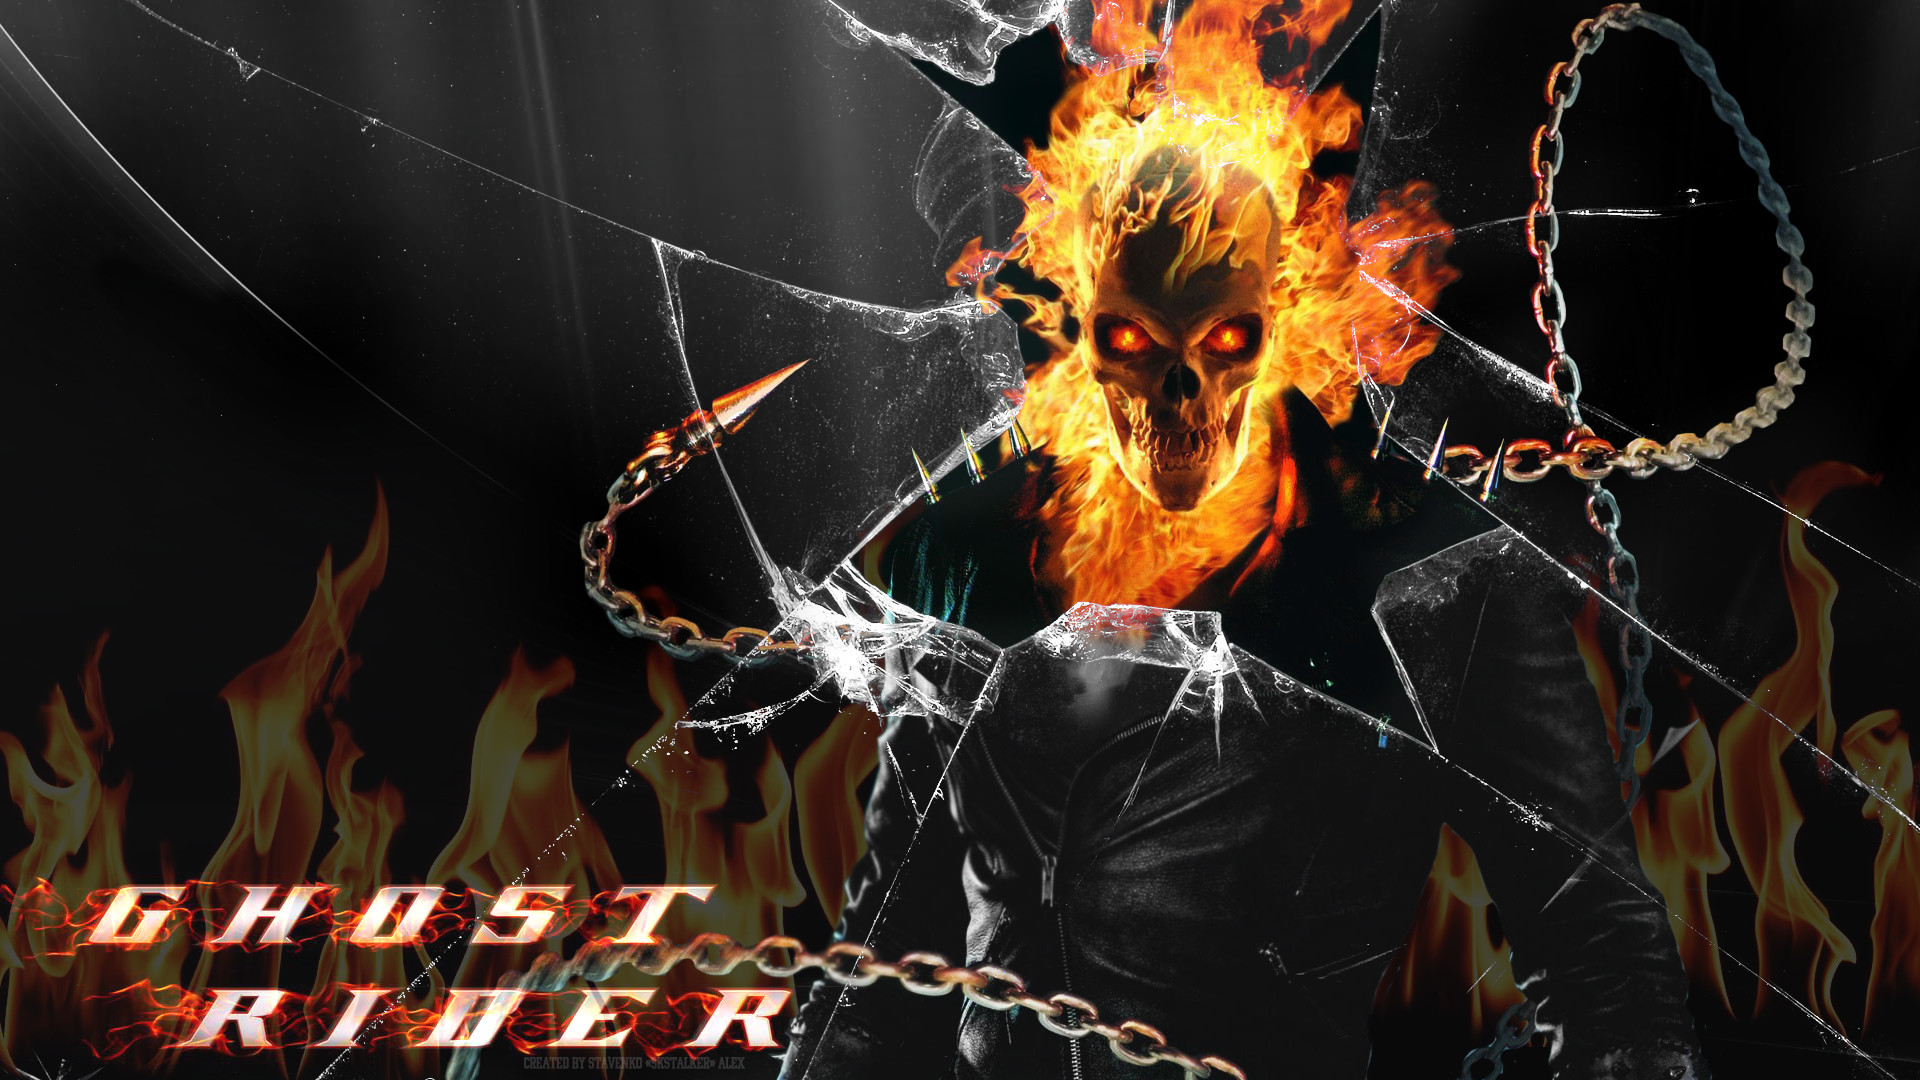 1920x1080 The Ghost Rider images Ghost rider HD wallpaper and background photos